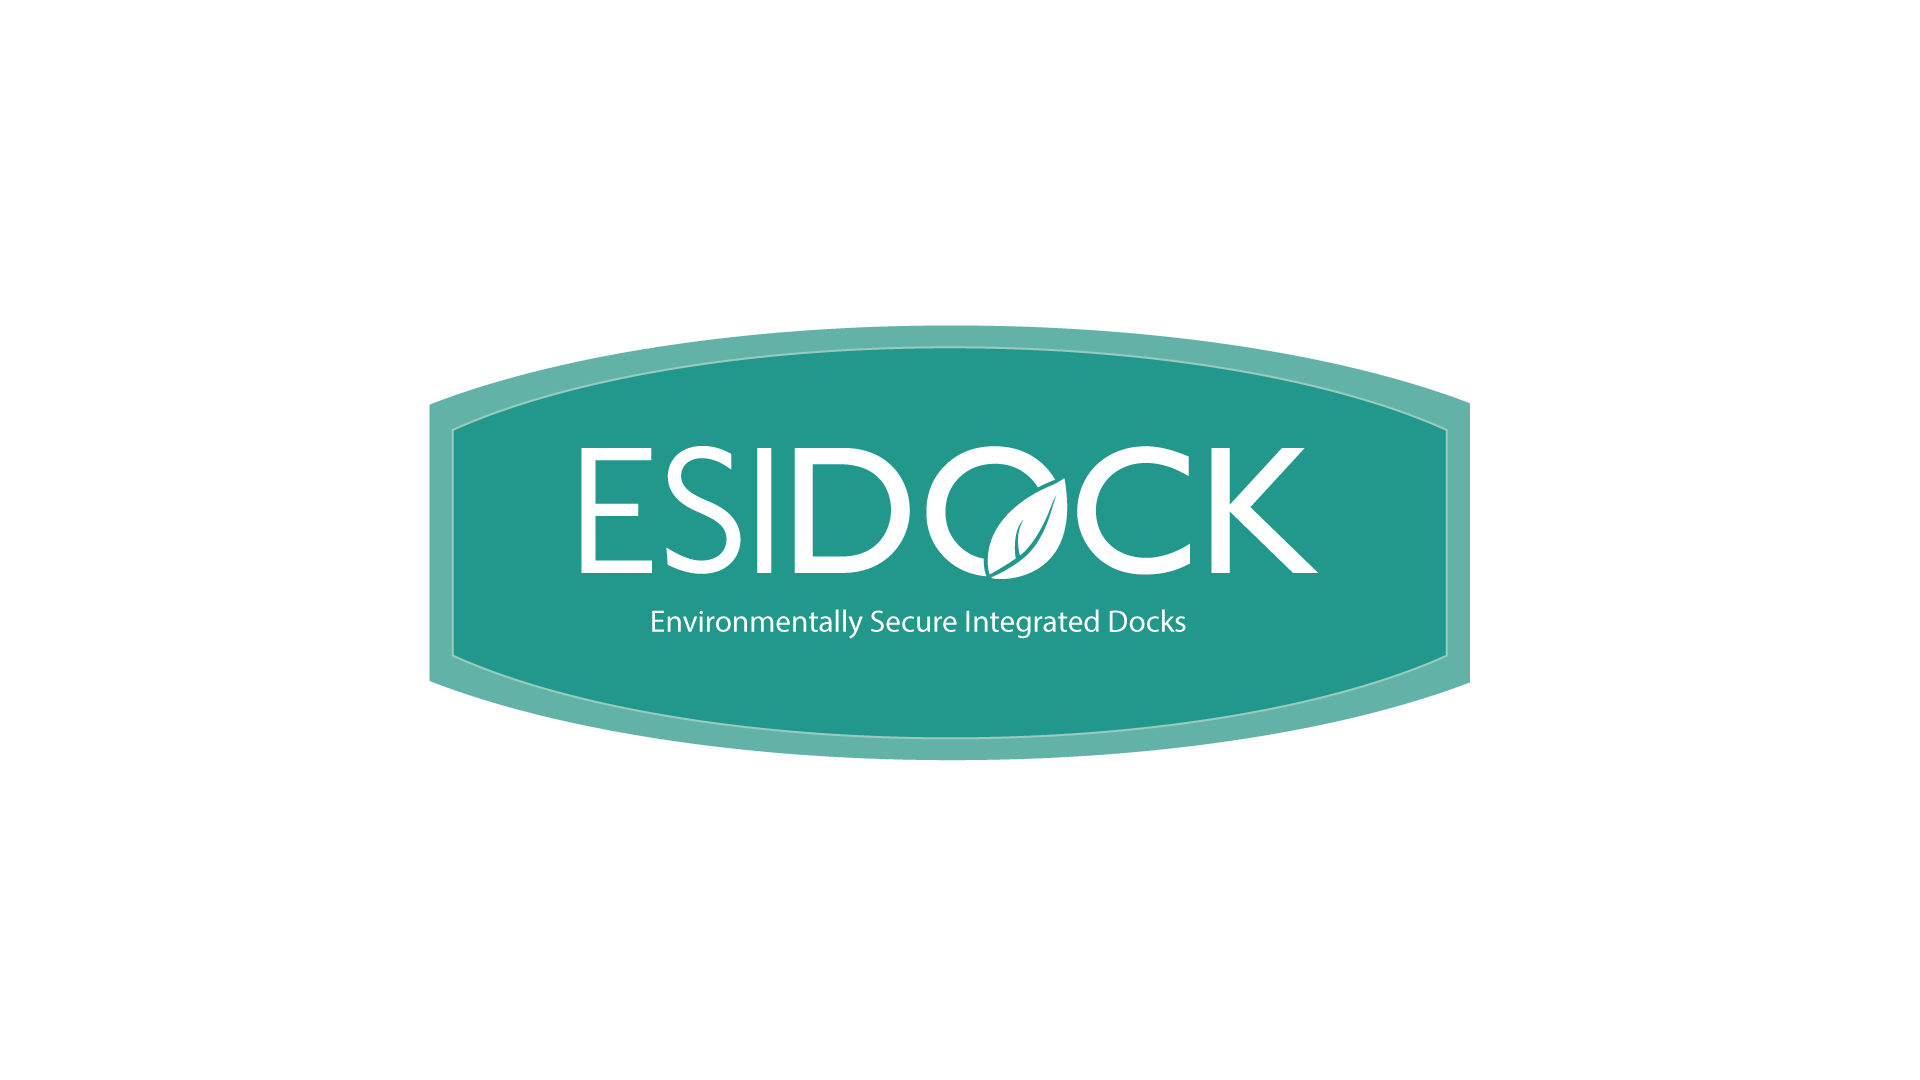 Esidock works with CADS